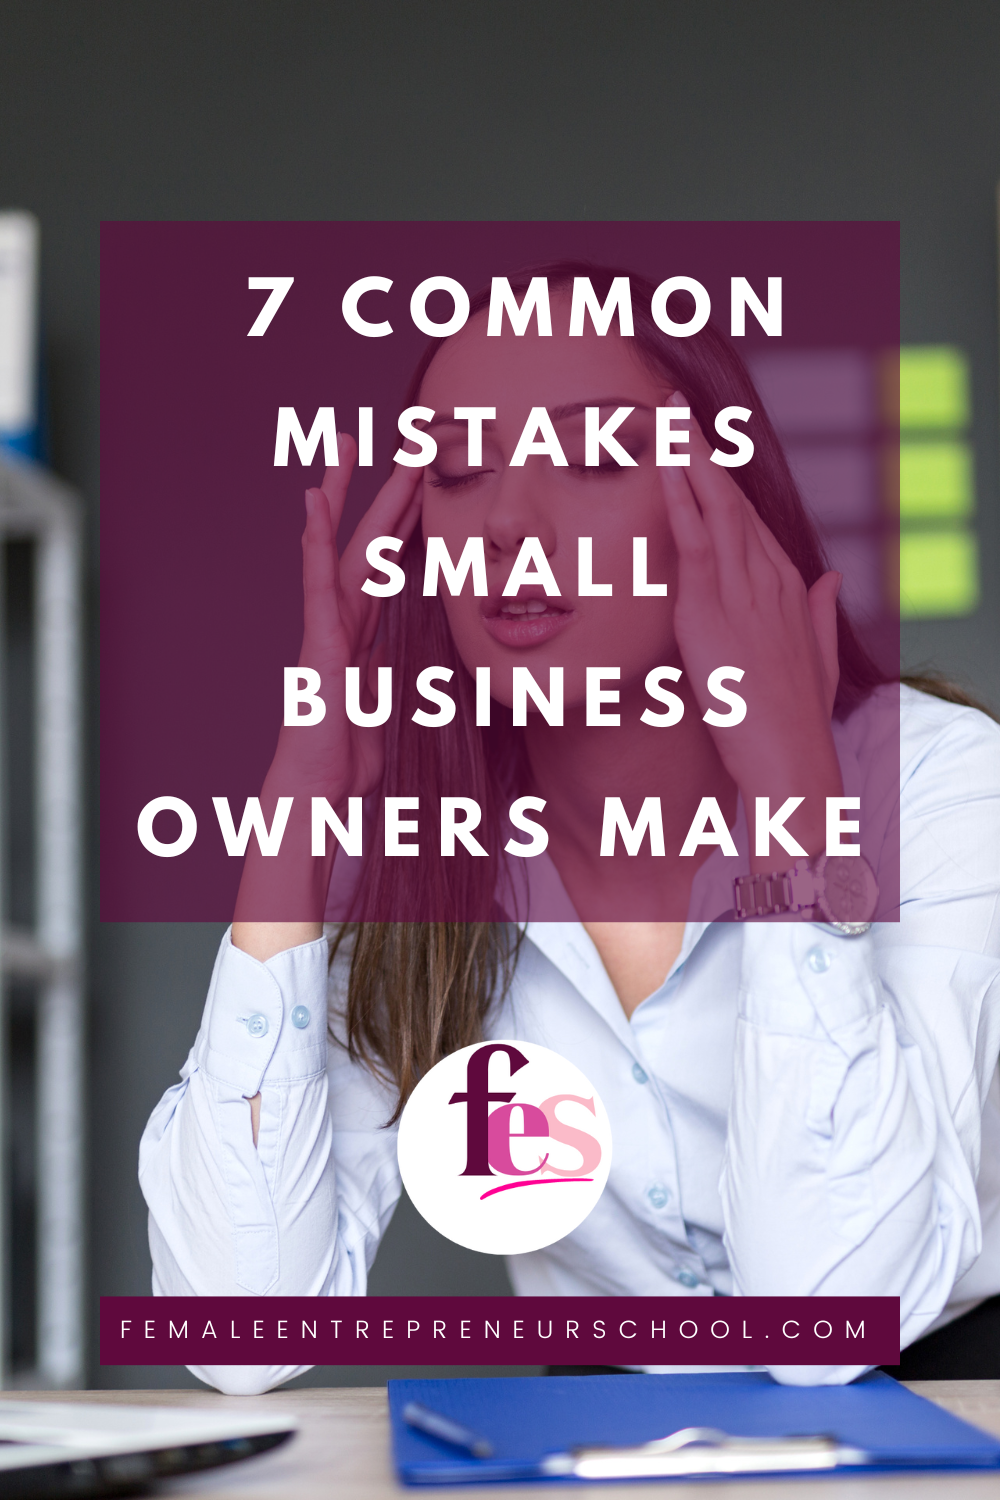 7 Common Mistakes Small Business Owners Make